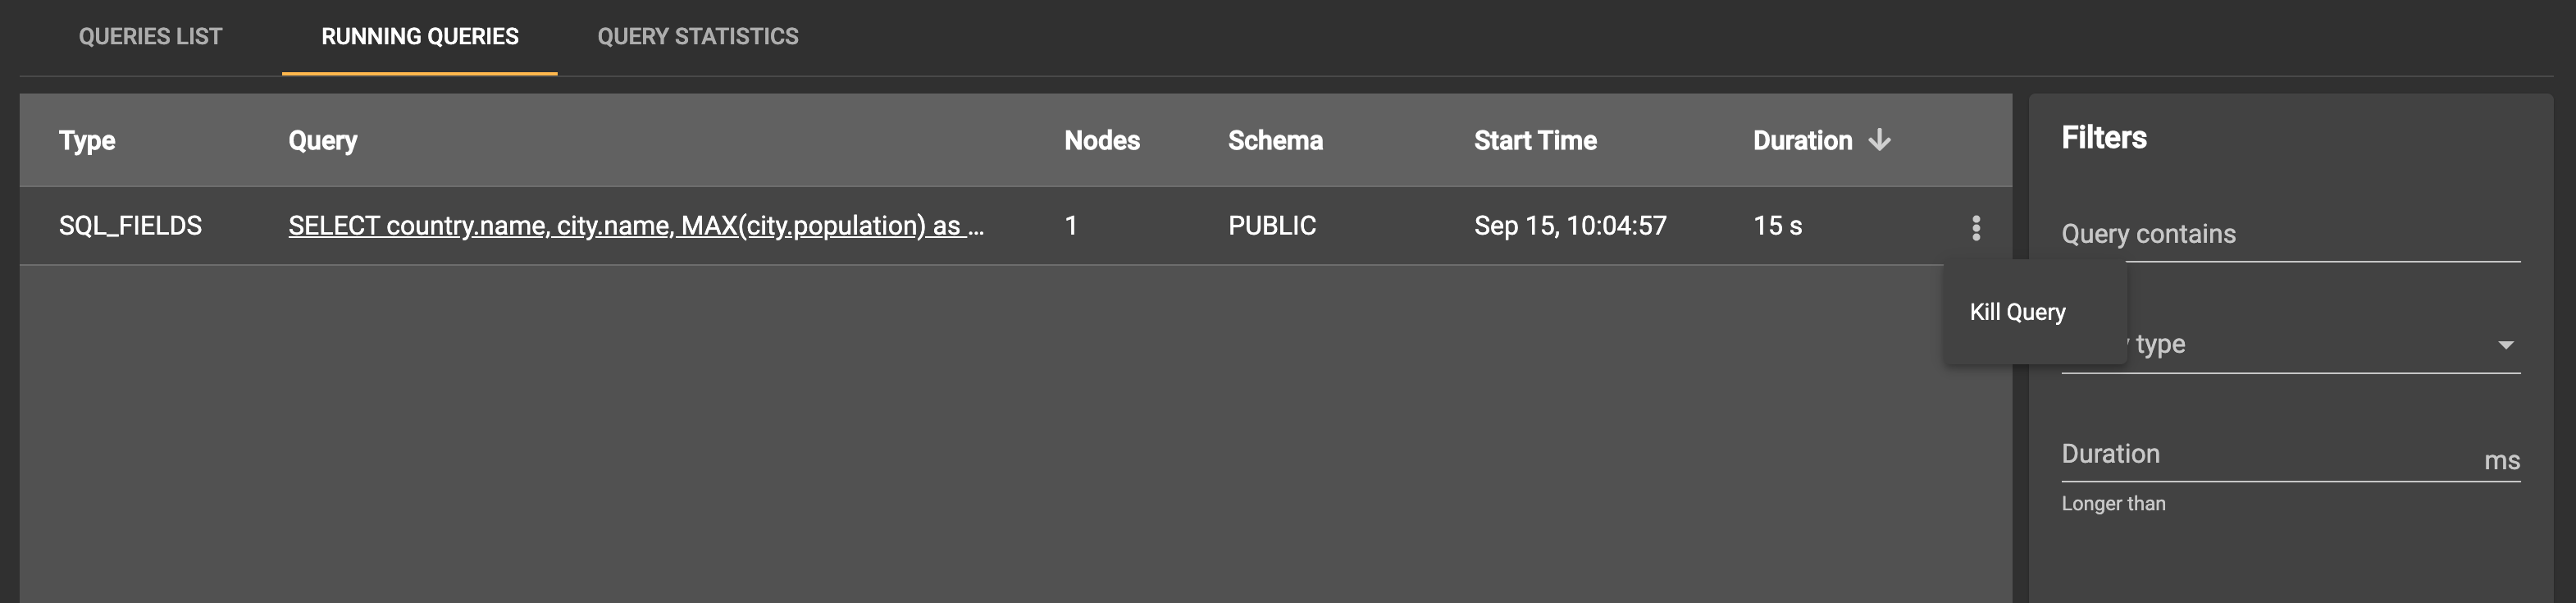 Apache Ignite Monitoring With Control Center - Running Queries